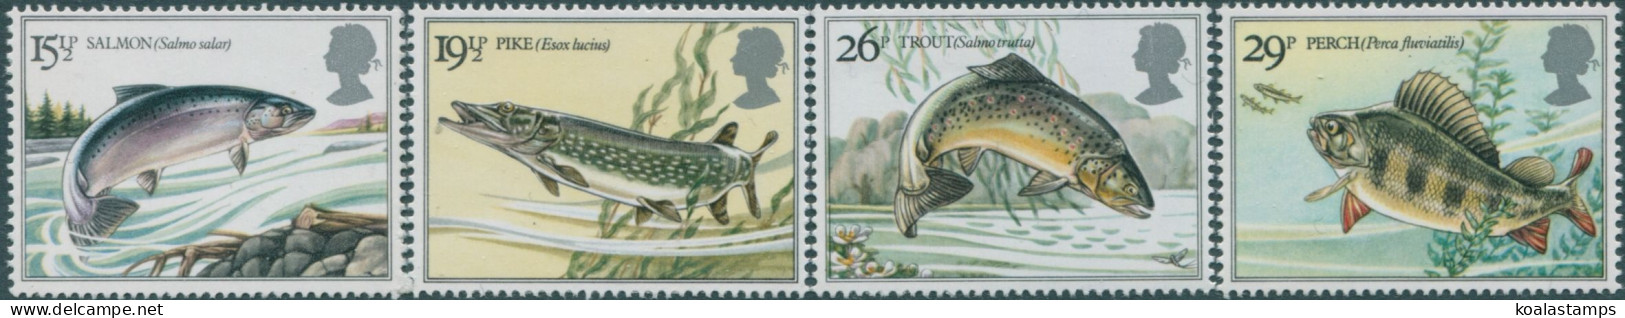 Great Britain 1983 SG1207-1210 QEII River Fish Set MNH - Unclassified